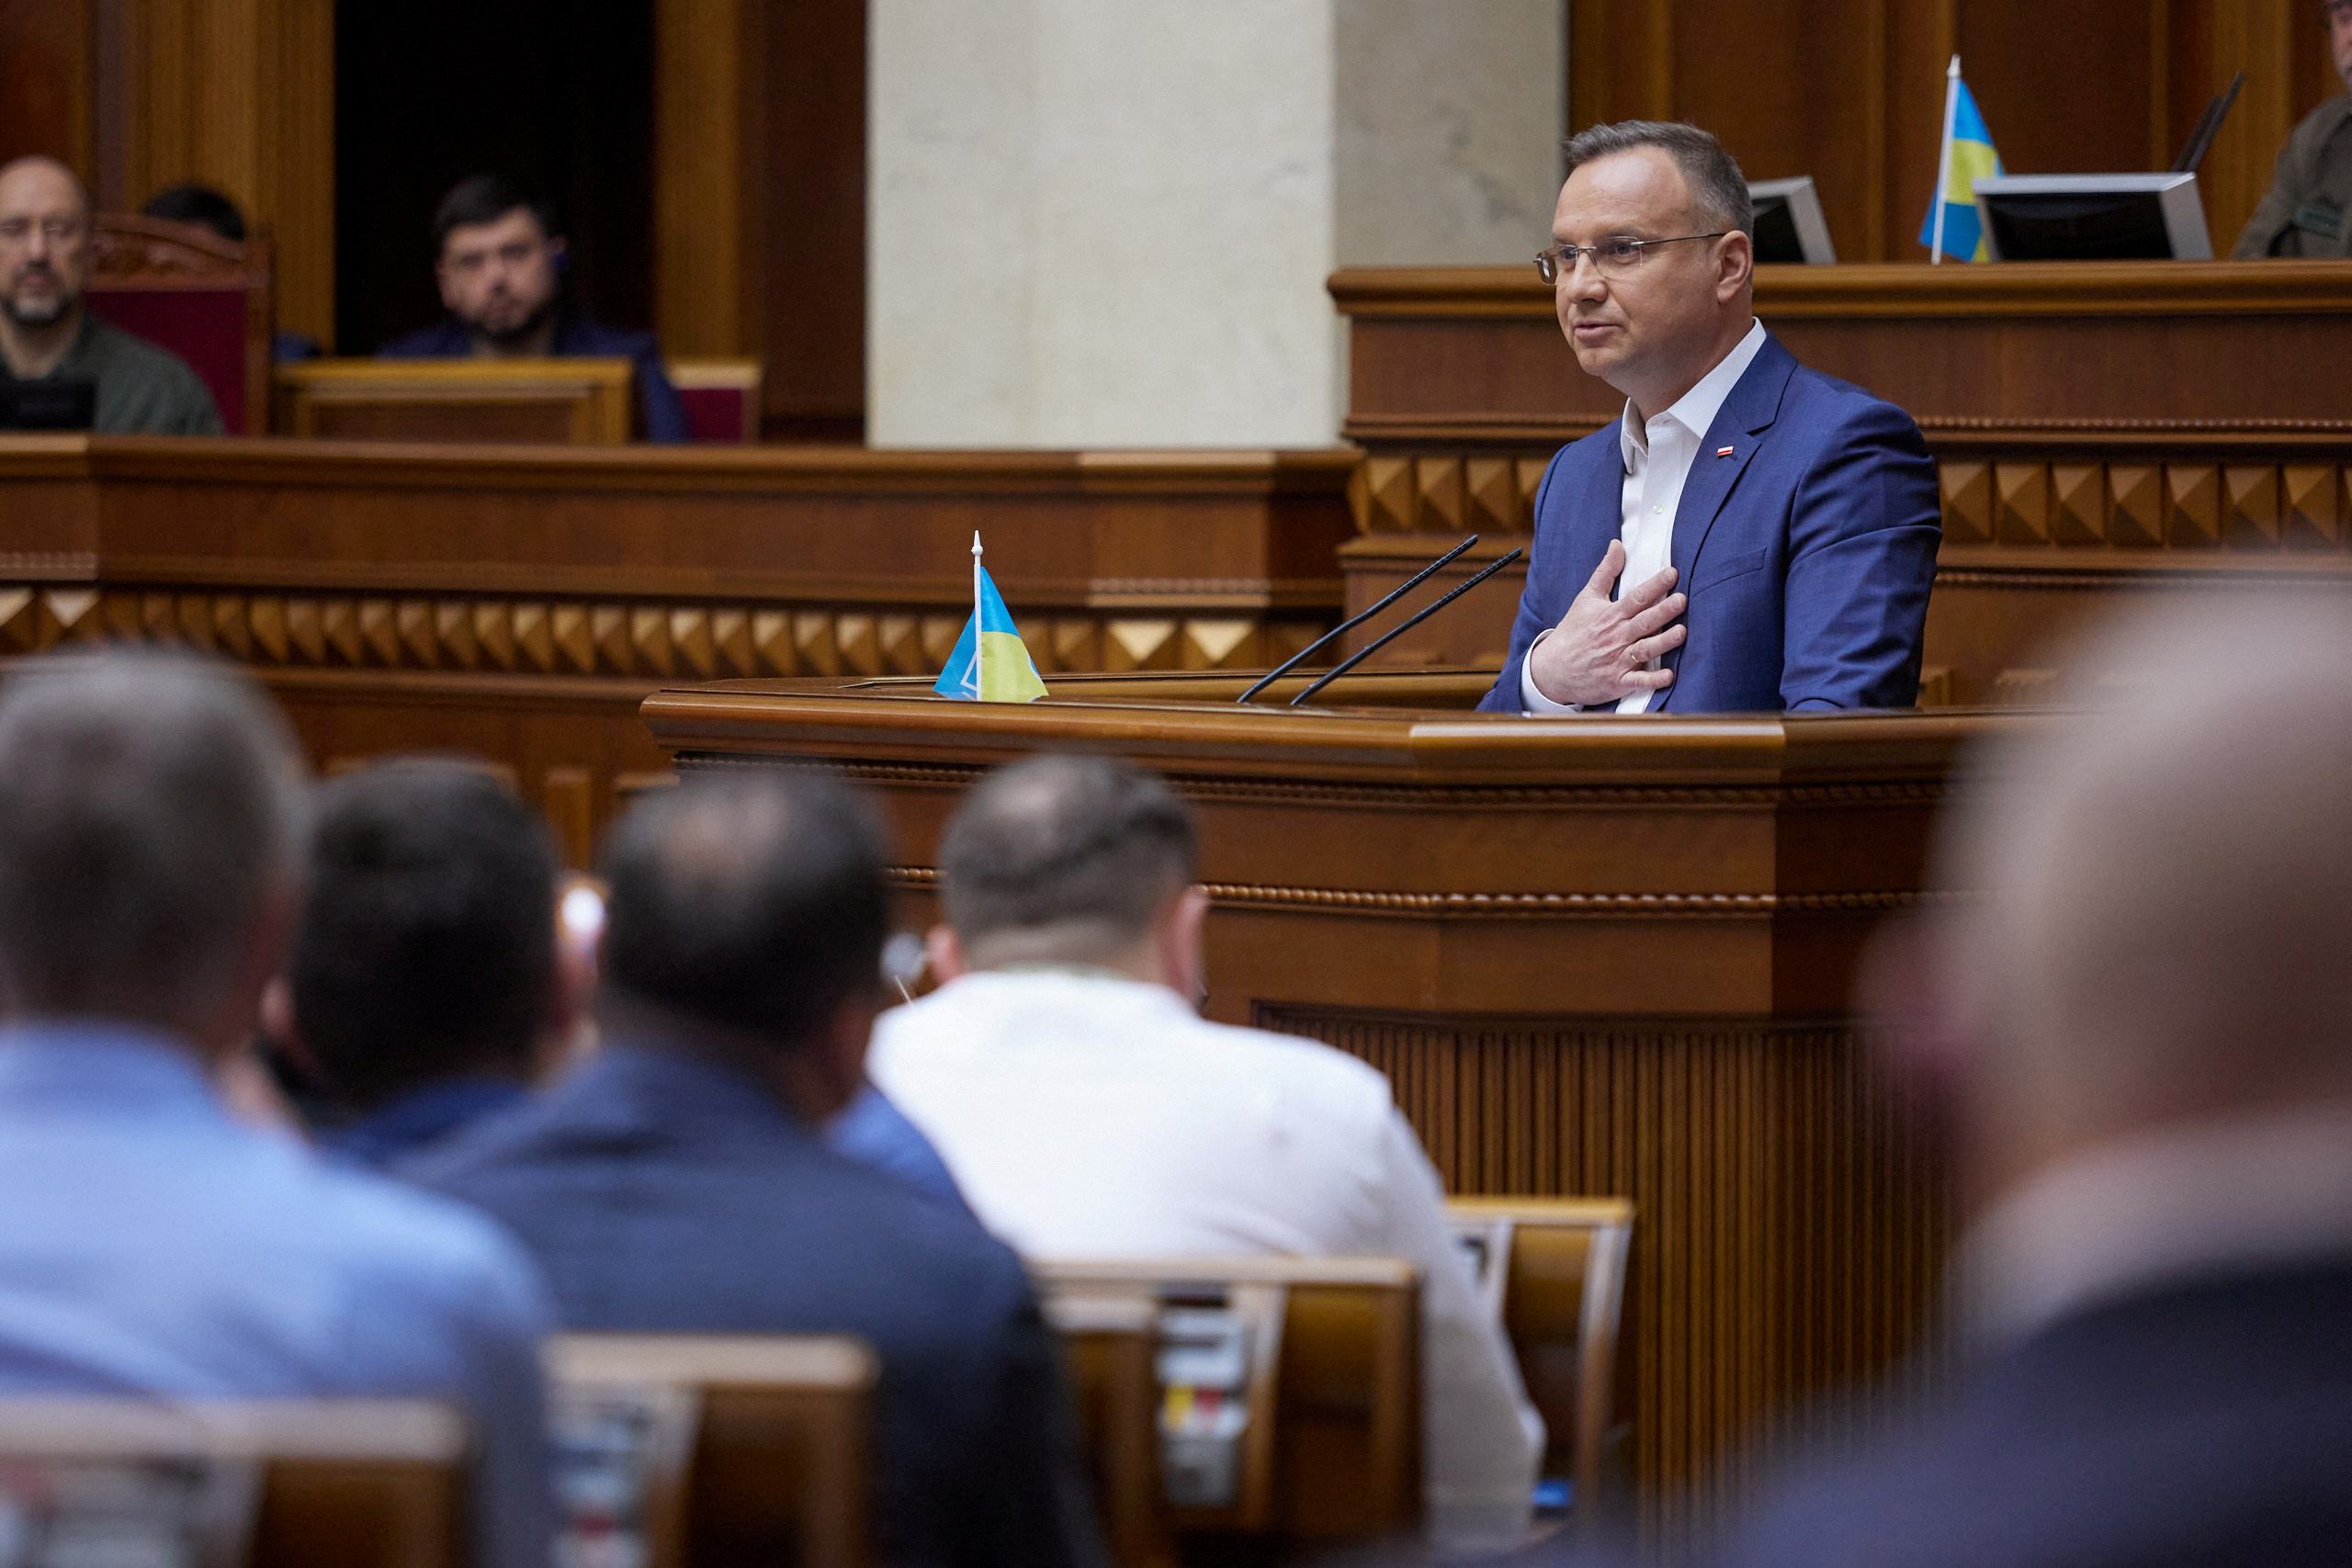 Poland's President Duda attends session of Ukrainian parliament in Kyiv